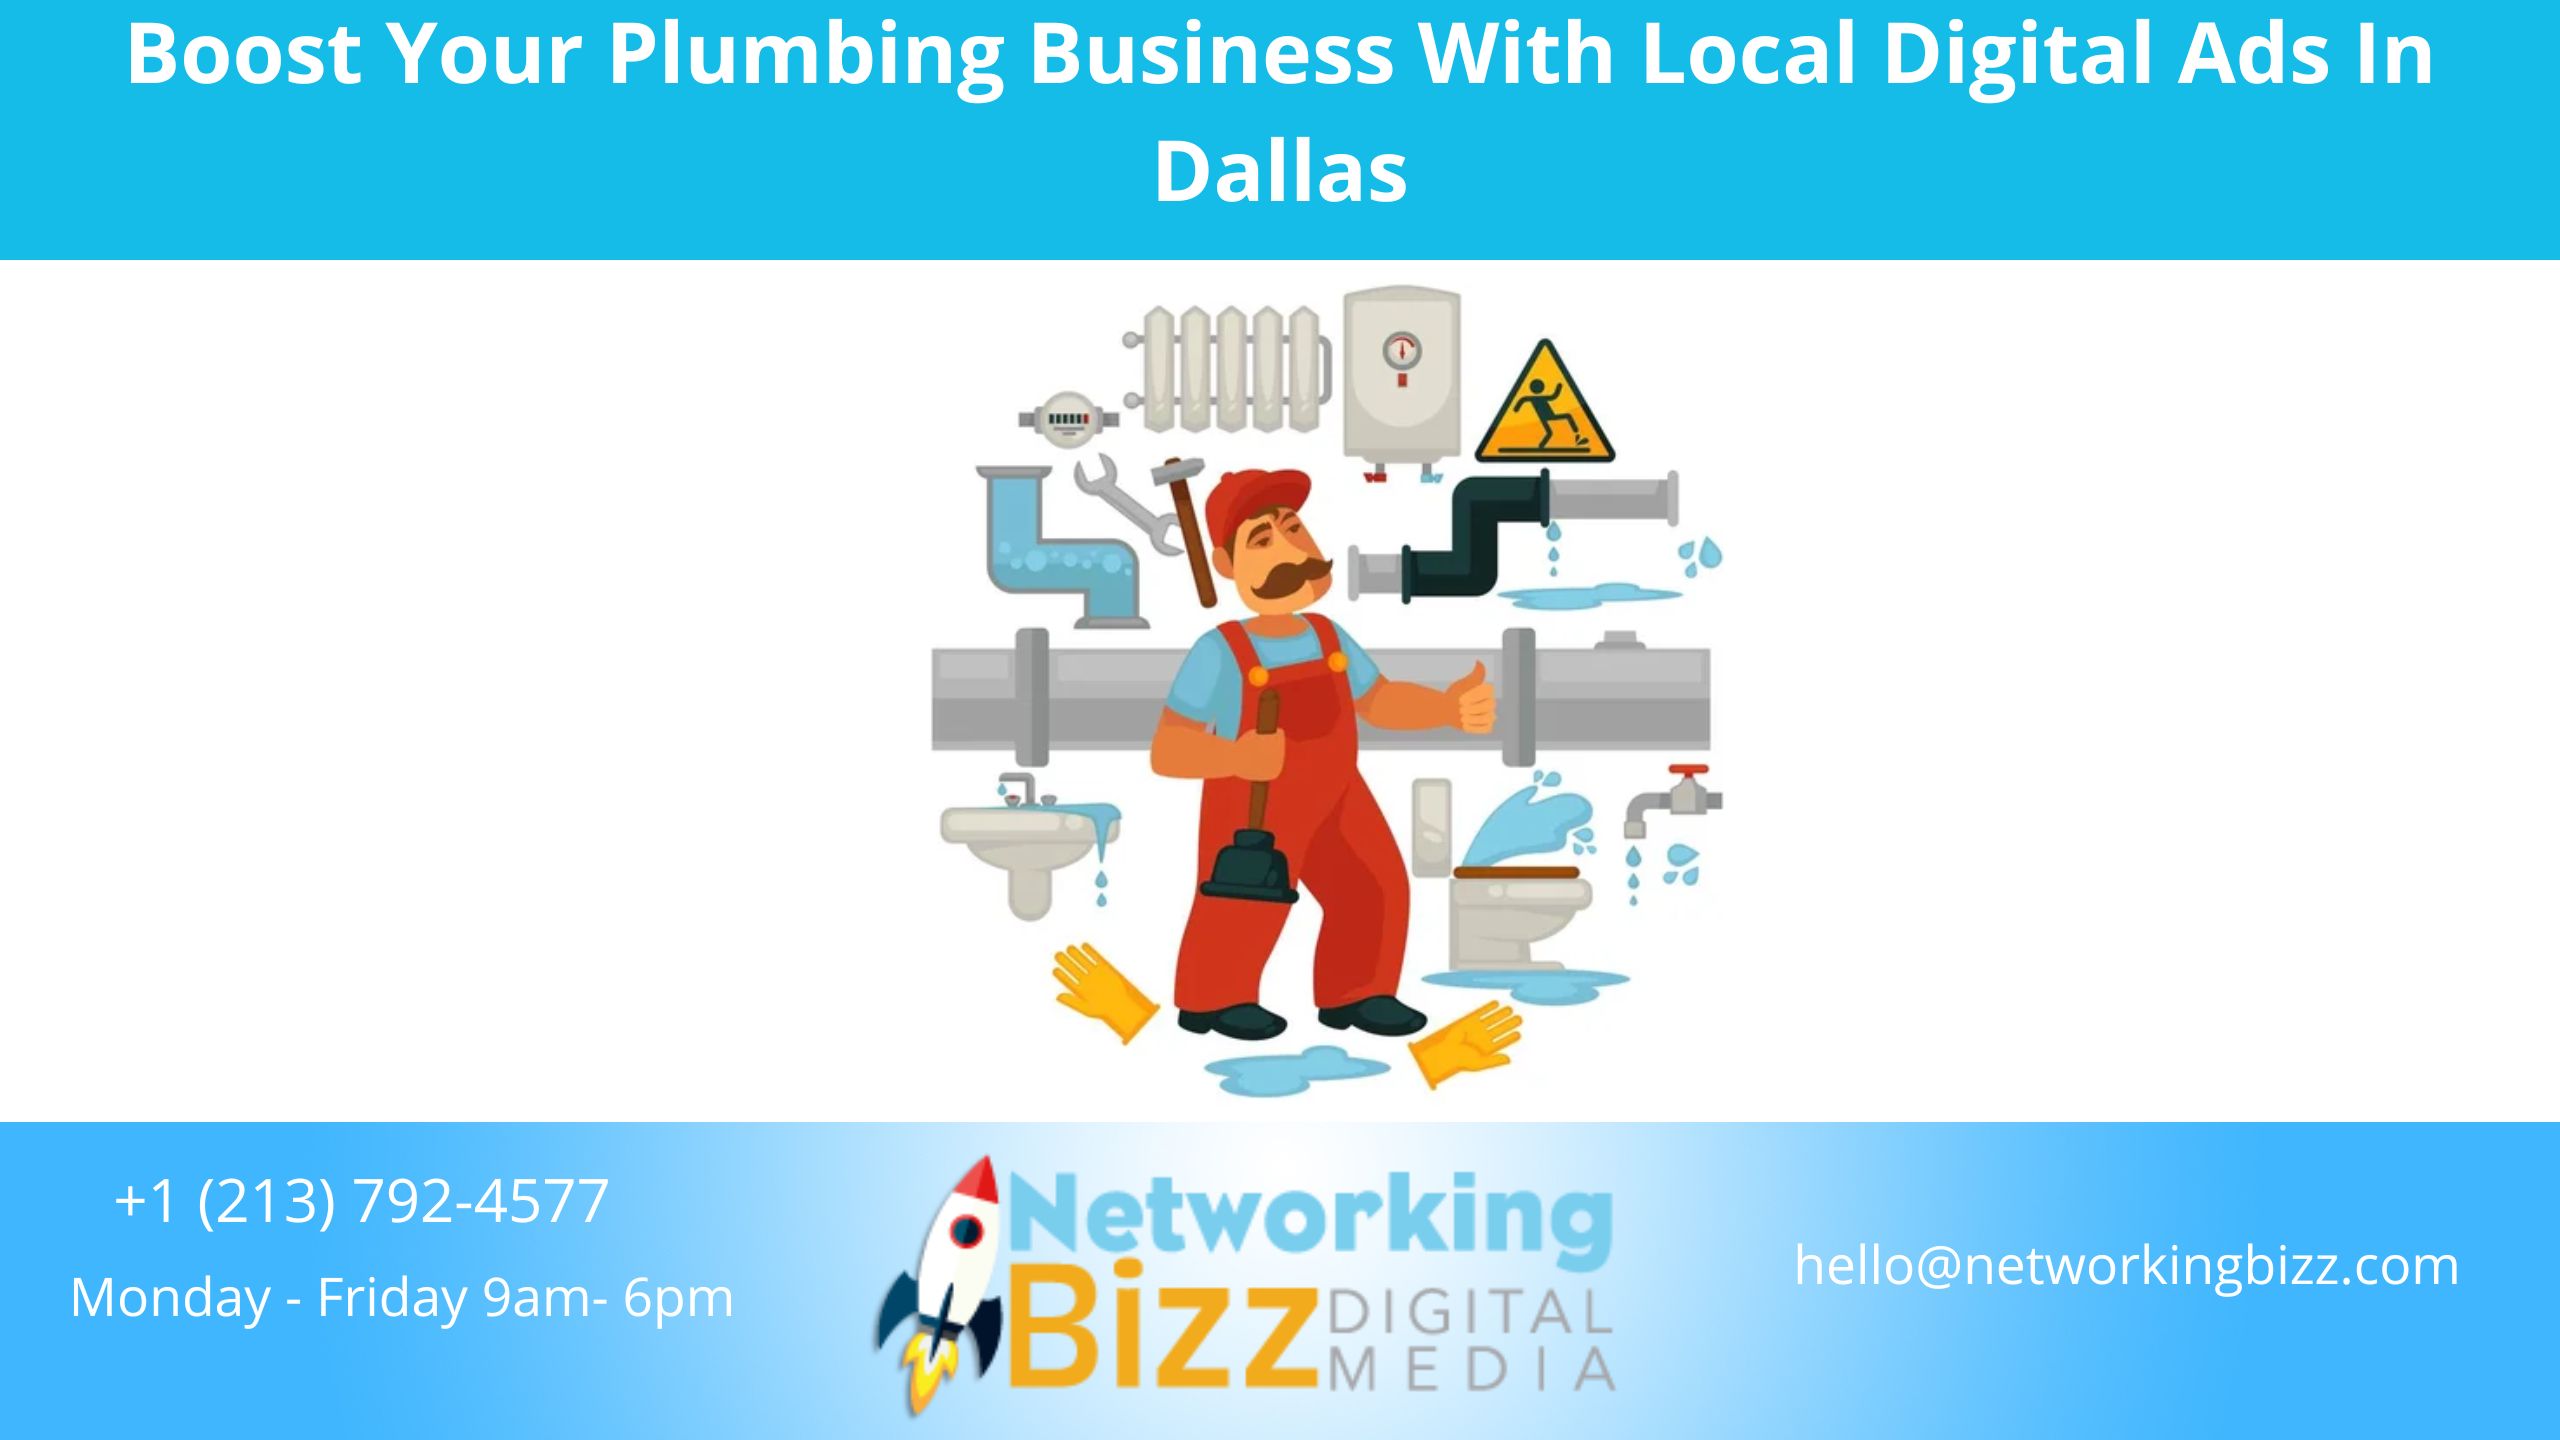 Boost Your Plumbing Business With Local Digital Ads In Dallas